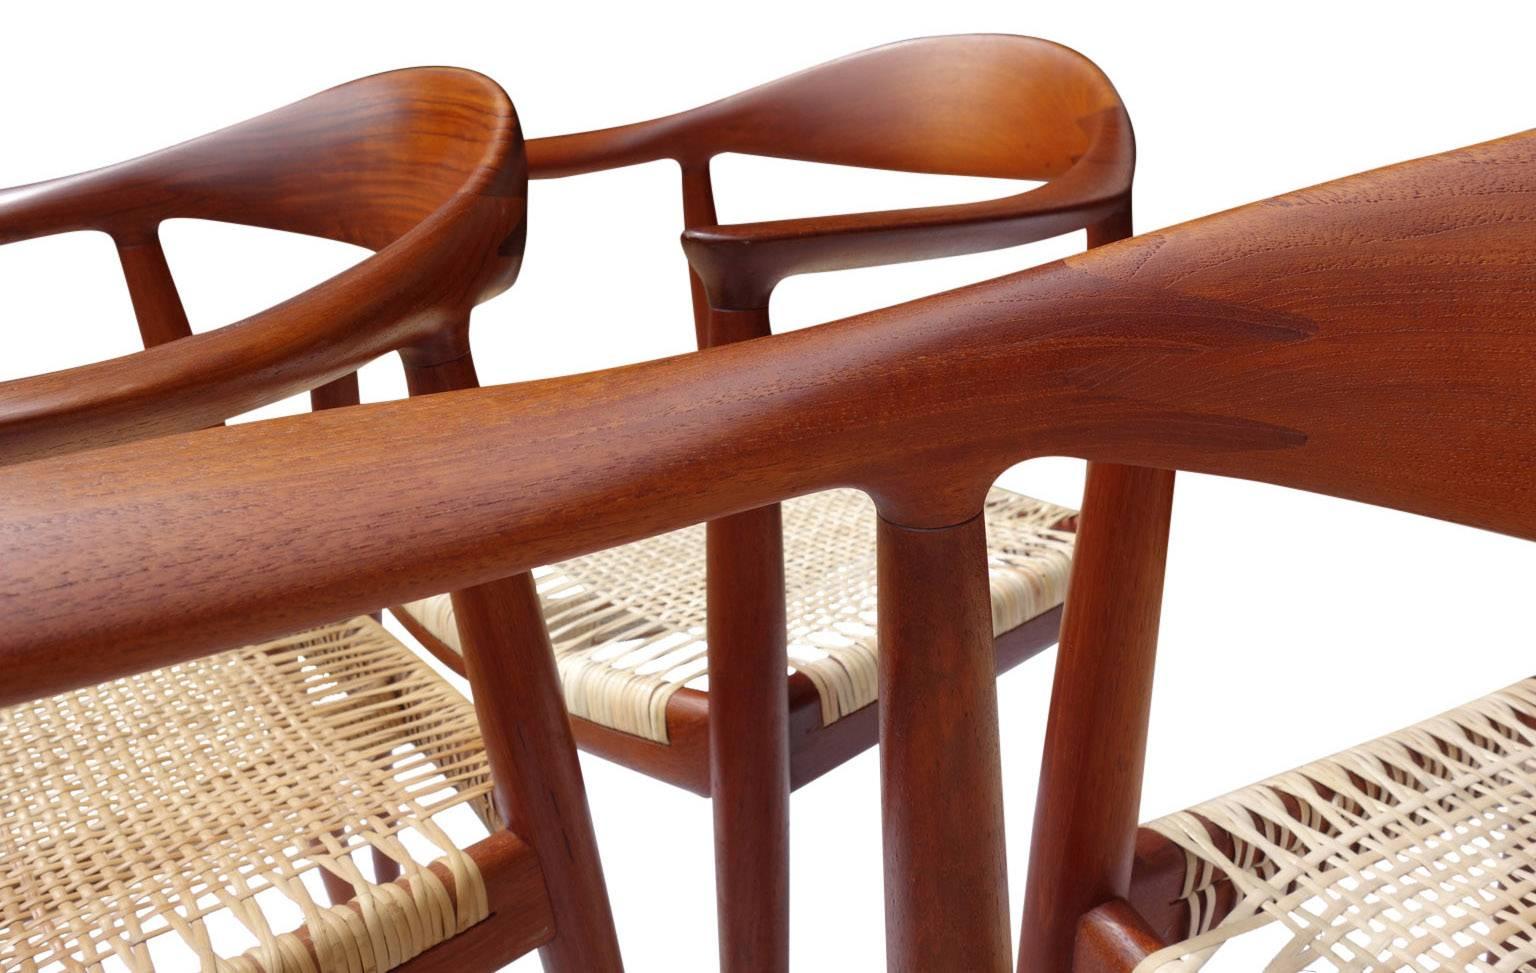 Model JH501 Denmark, 1960s; Teak, woven reed; Branded with designer and manufacturer name (Johannes Hansen) with distributor's paper Knoll label. Three chairs have been re-caned. All Cane is in excellent condition. Also known as "The